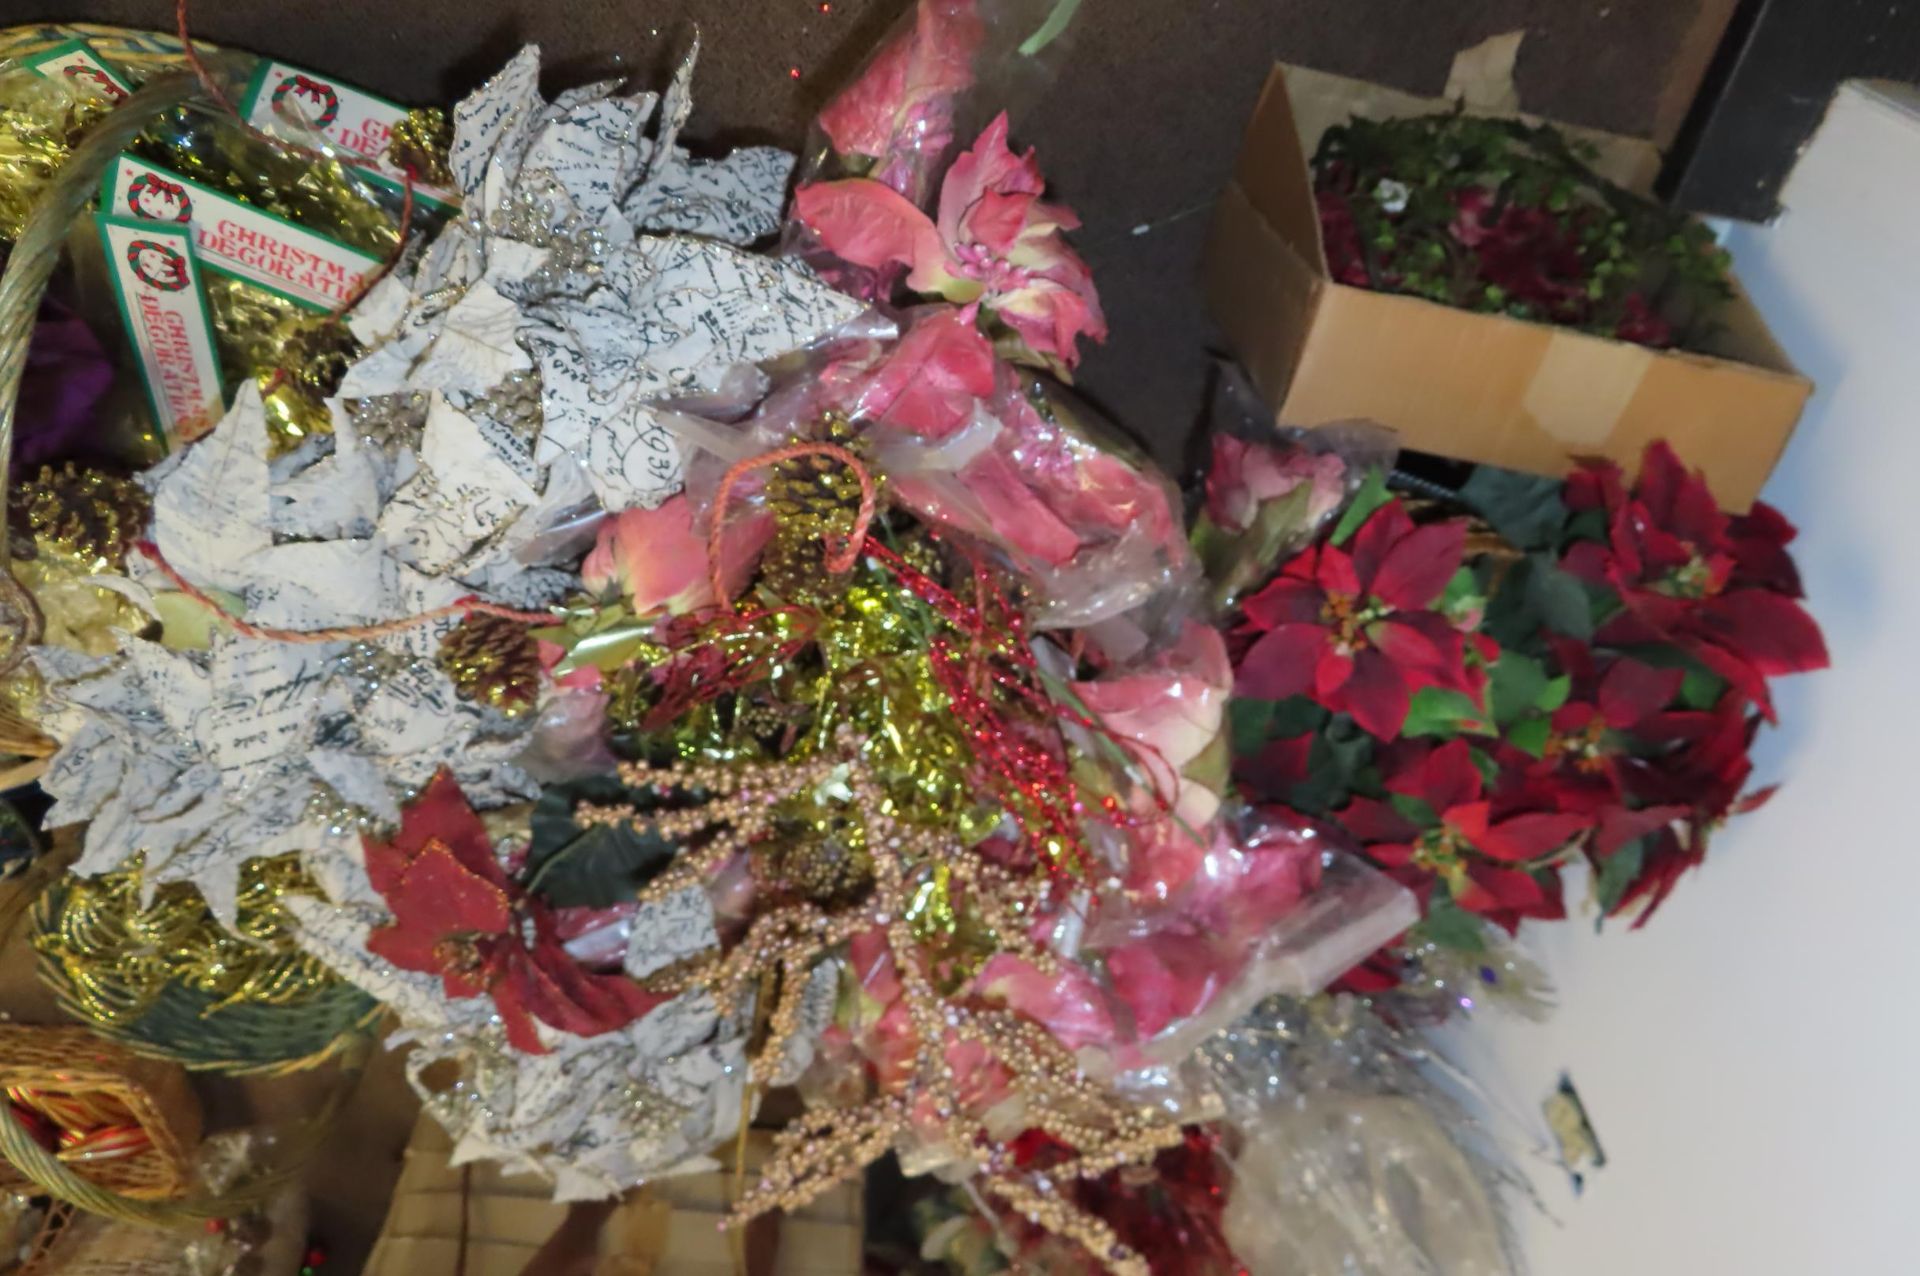 ASST. FLOWERS, JEWELED FLOWERS, ORNAMENTS, (1) ANGEL, (3) TIN AND (1) WICKER… - Image 9 of 9